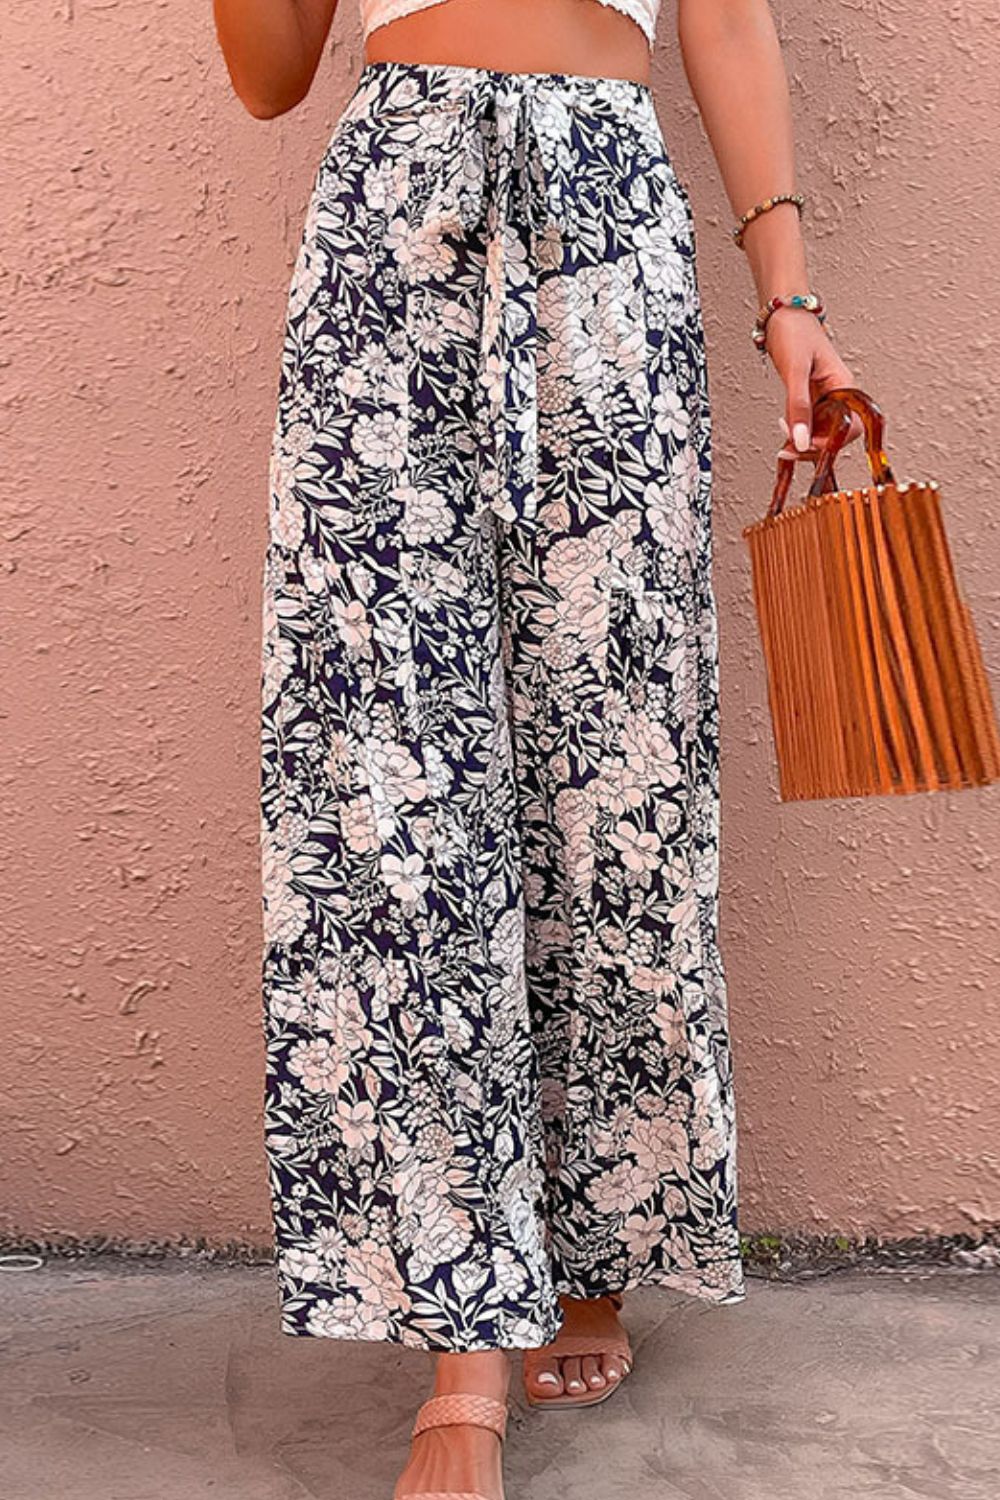 Floral Belted Wide Leg Pants - Fashion Girl Online Store